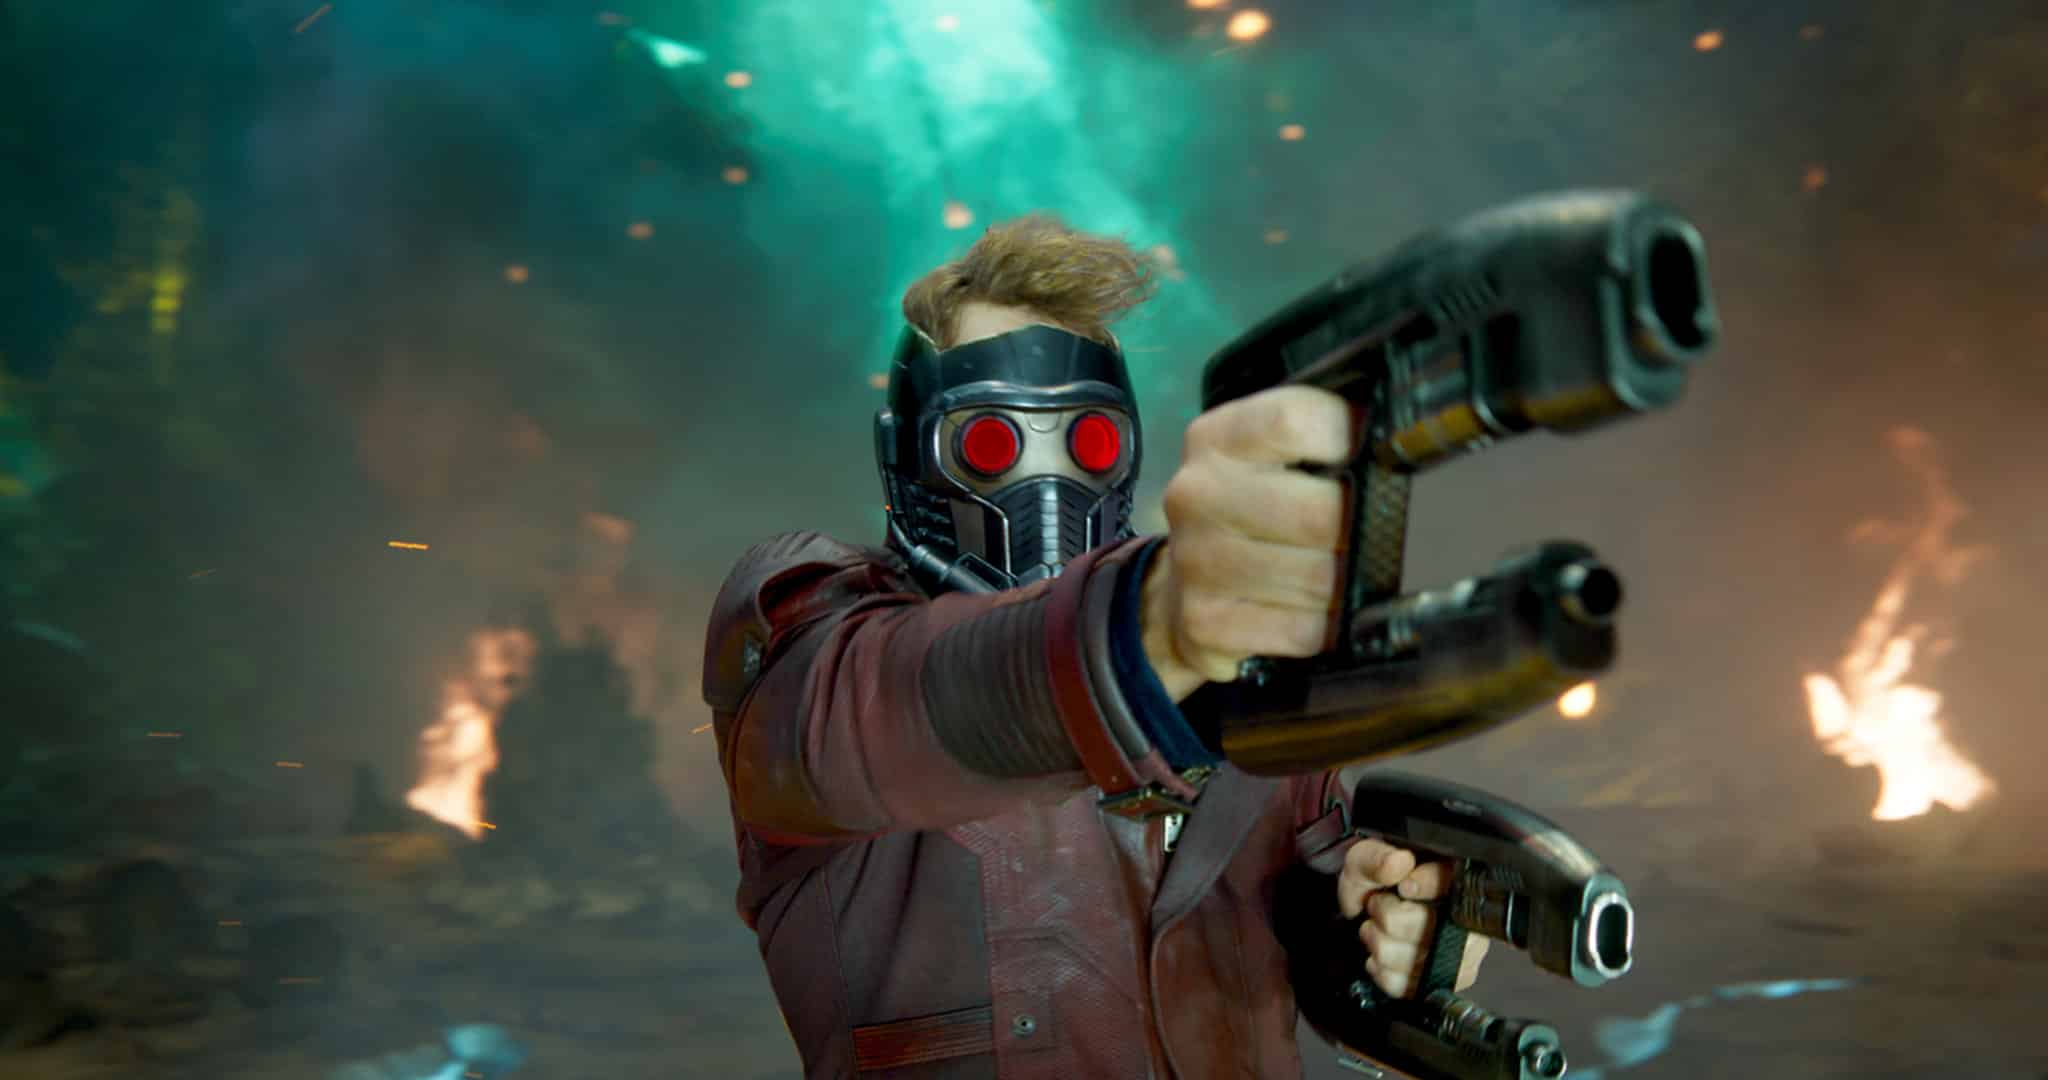 star-lord-fires-his-guns-in-marvel-cinematic-universe-phase-3-movie-guardians-of-the-galaxy-vol-3